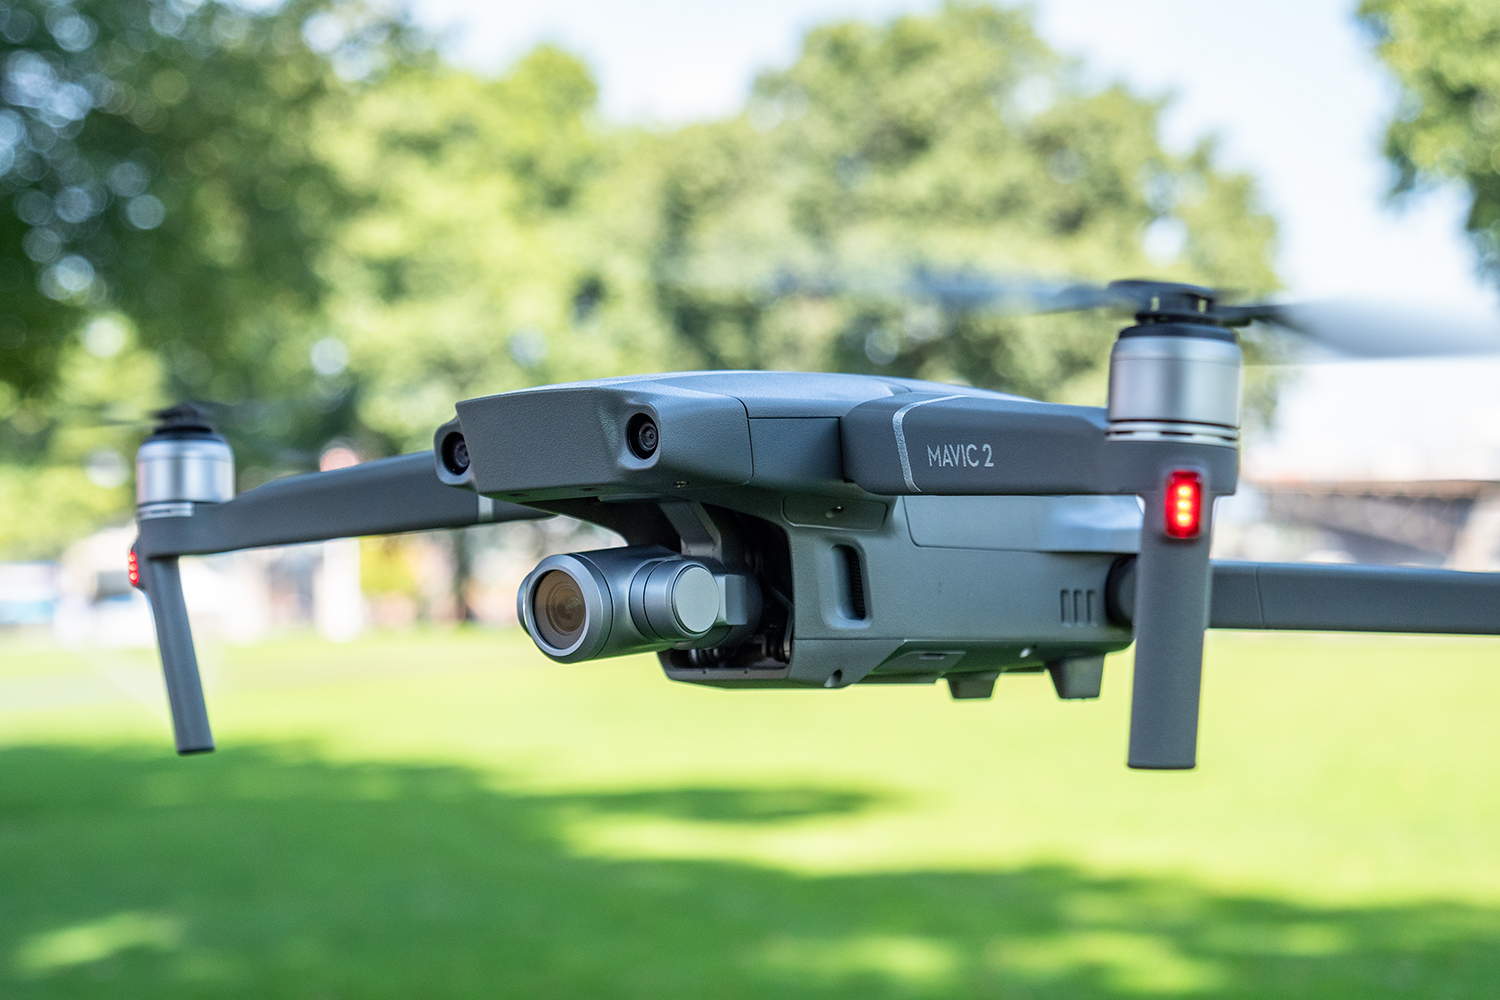 DJI Mavic 2 Pro 'World's First Drone with Integrated Hasselblad Camera